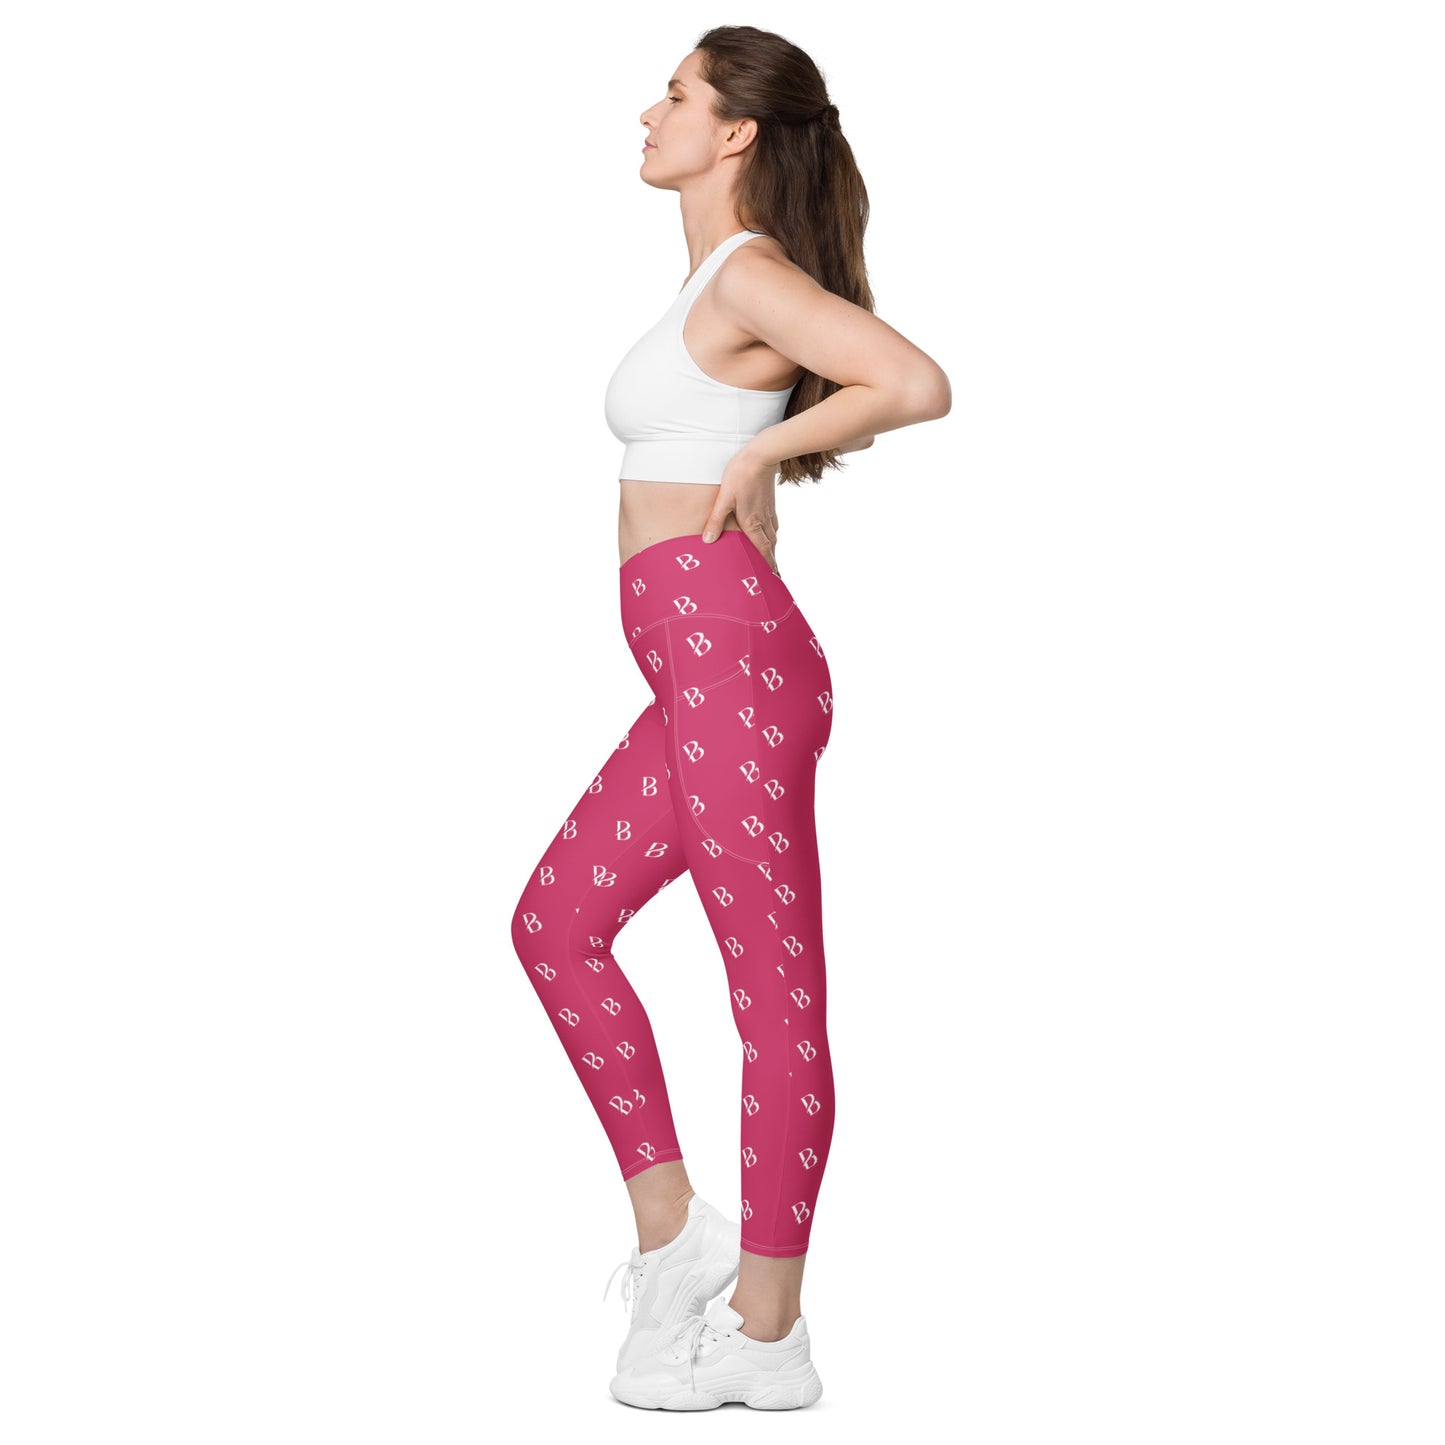 White Logo Born 2 Move "B" Crossover Leggings with Pockets